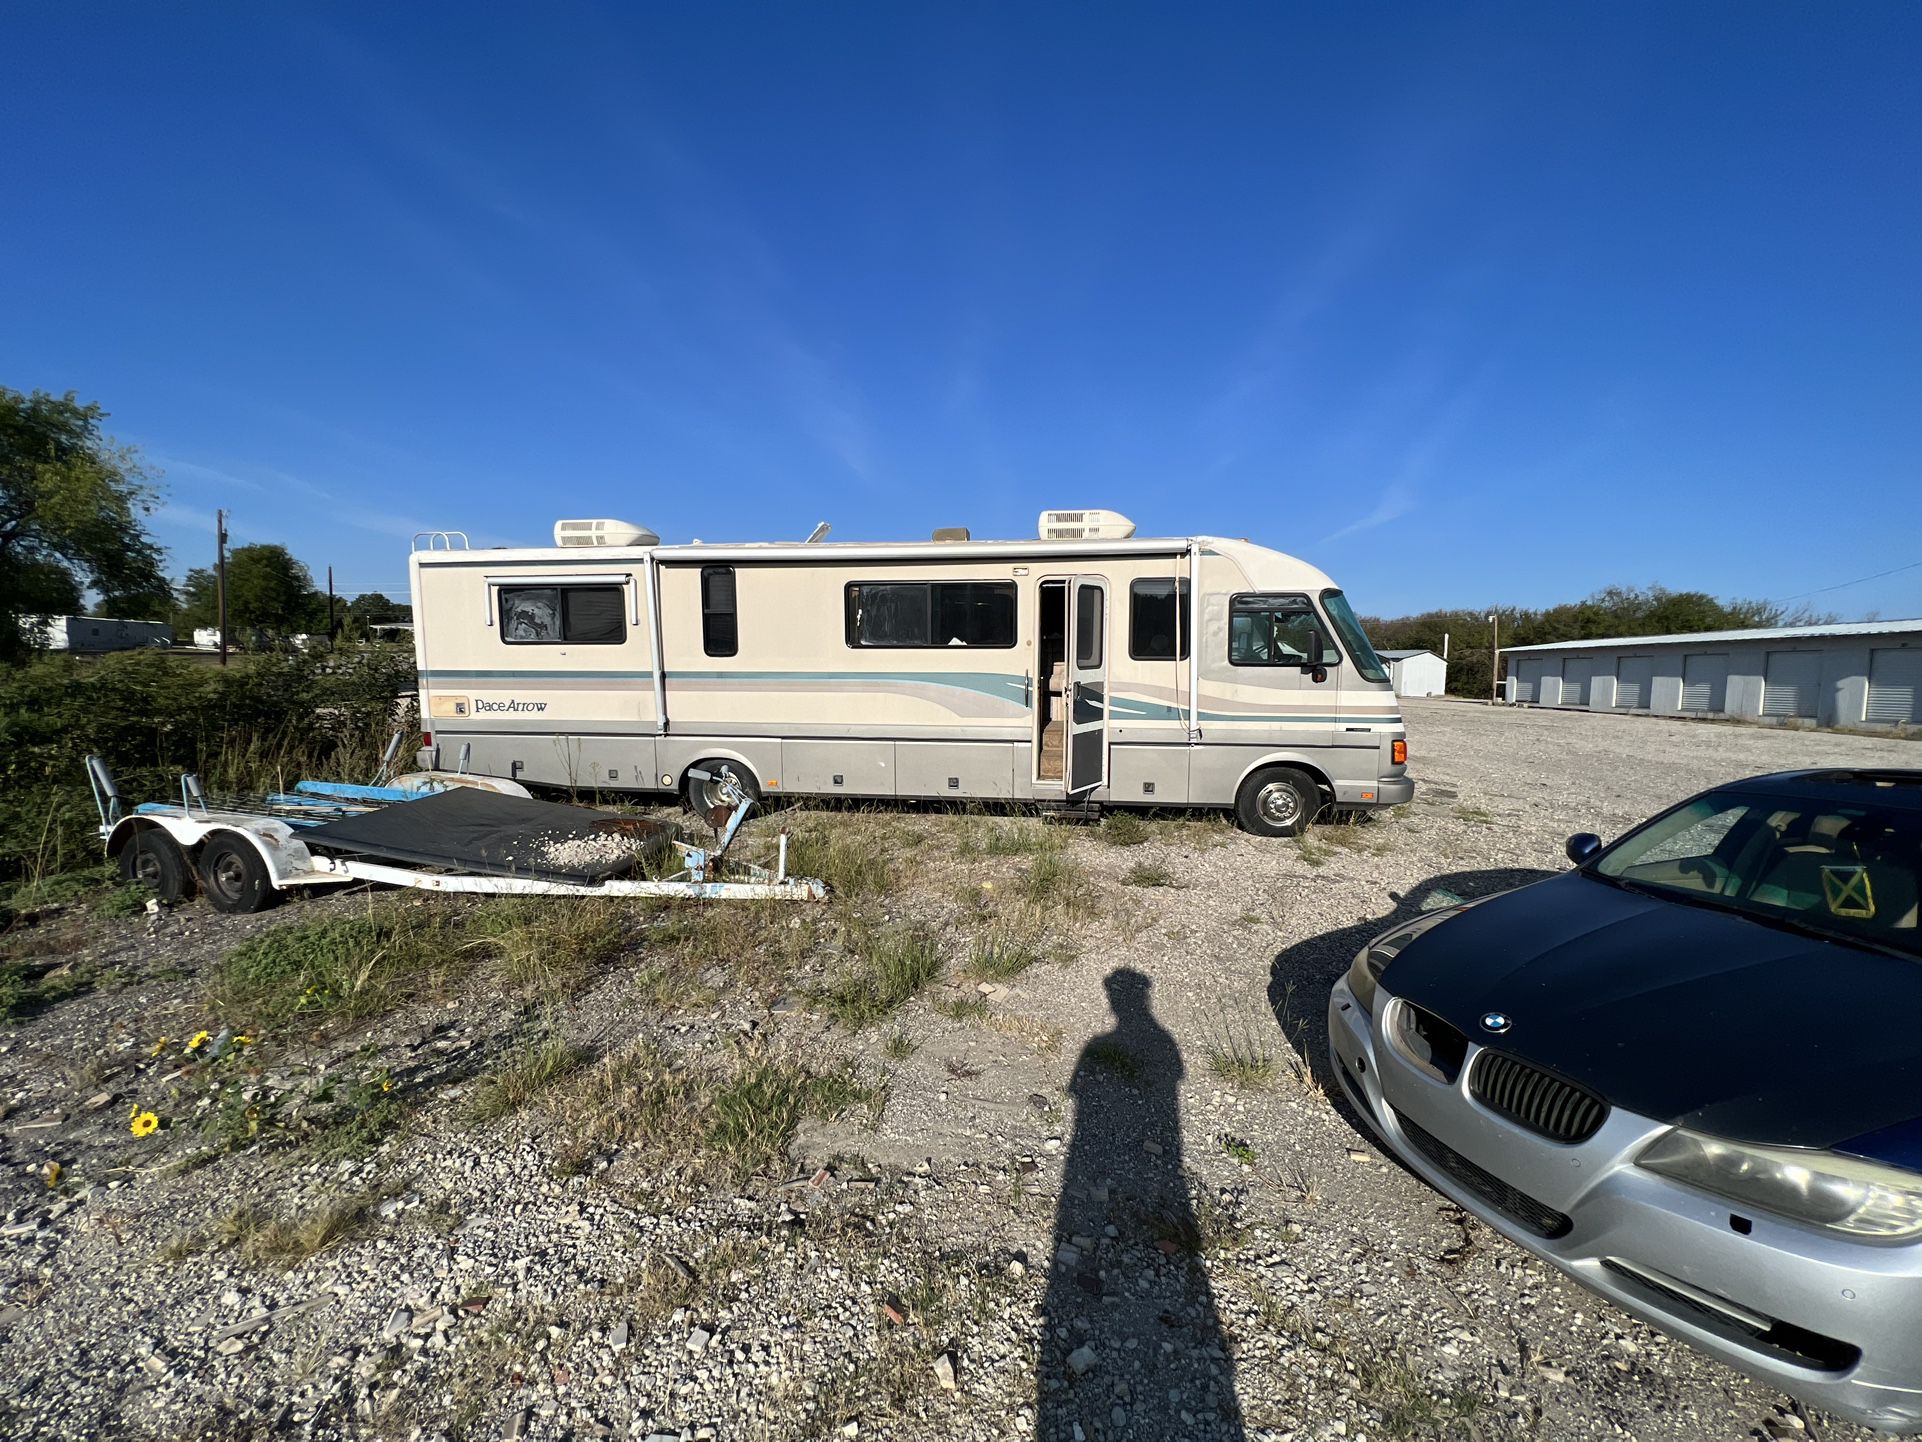 RV PACE ARROW FOR SALE RUNS AND DRIVE 